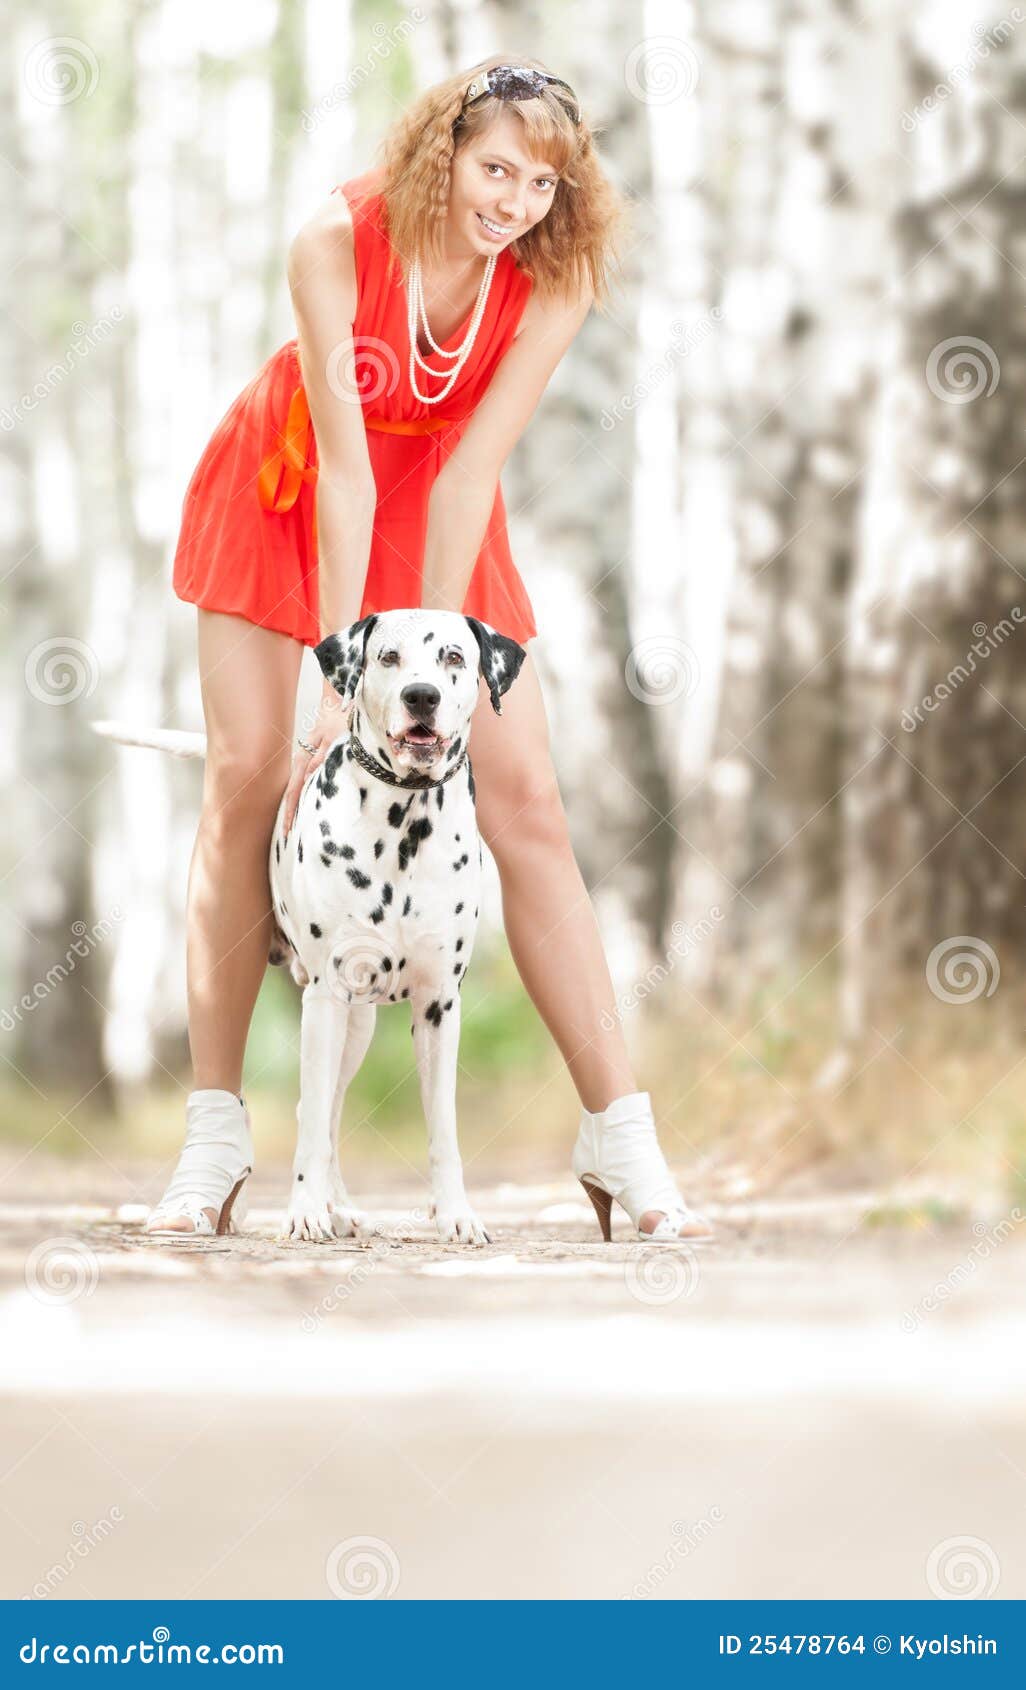 young woman with dog. Beautiful and young woman in red dress with dalmatian dog in summer forest.